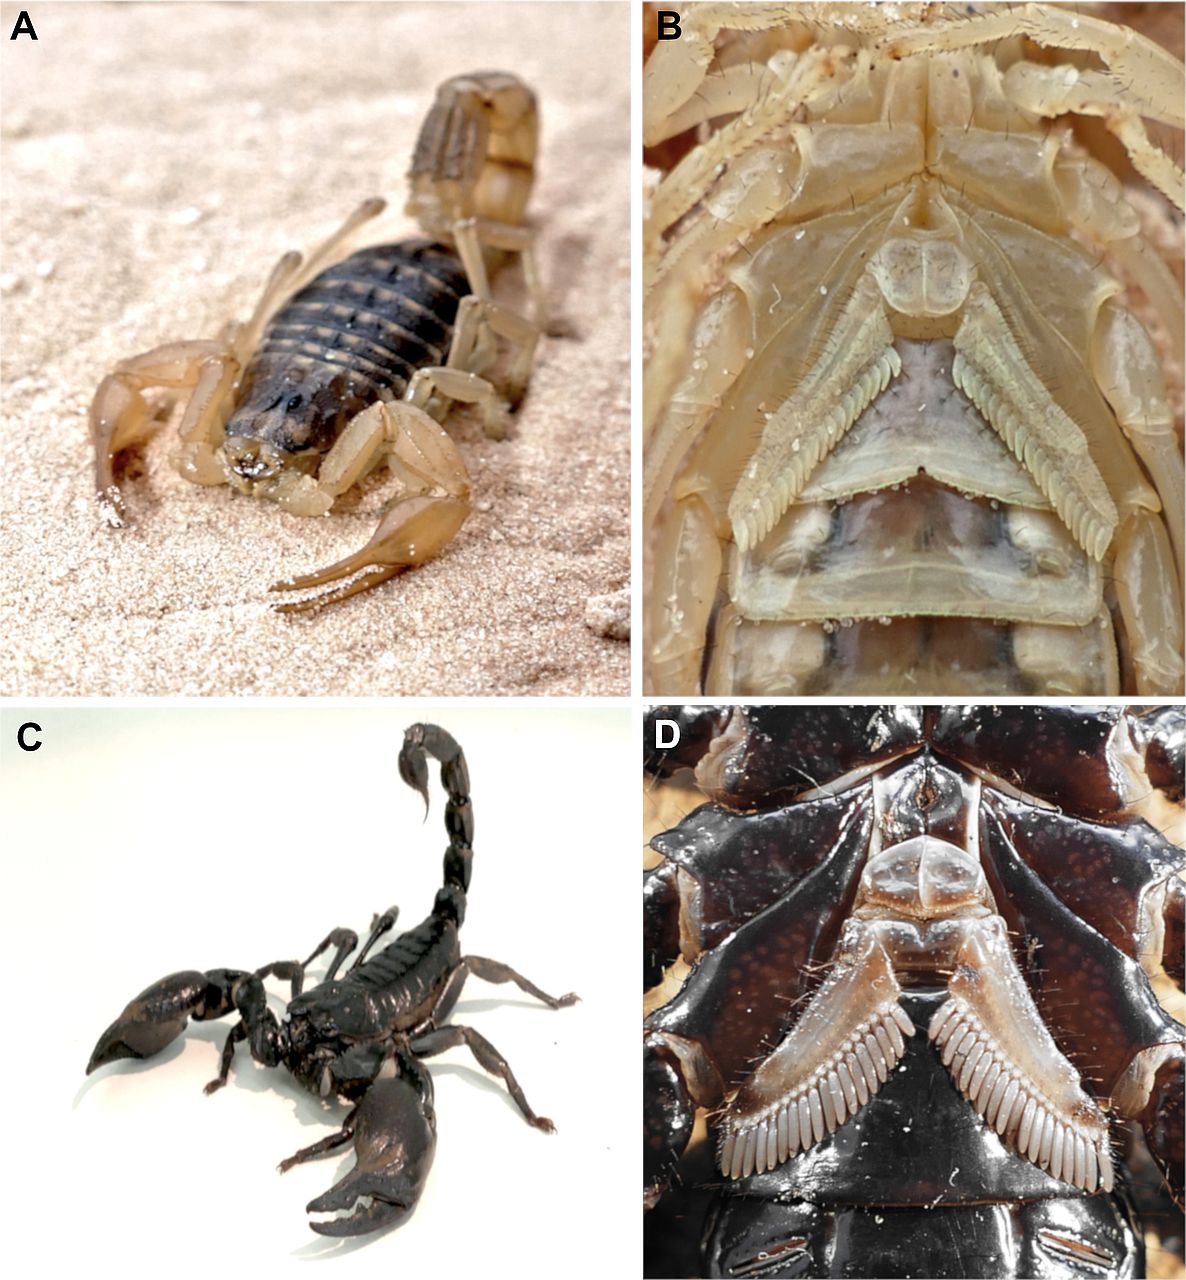 Scorpion species examined and their pectines. A: Mesobuthus on sandy ground. B: Paired pectine organ of Mesobuthus, ventral orientation. C: Heterometrus petersii in defence position. D: Paired pectine organ of Heterometrus petersii, ventral orientation